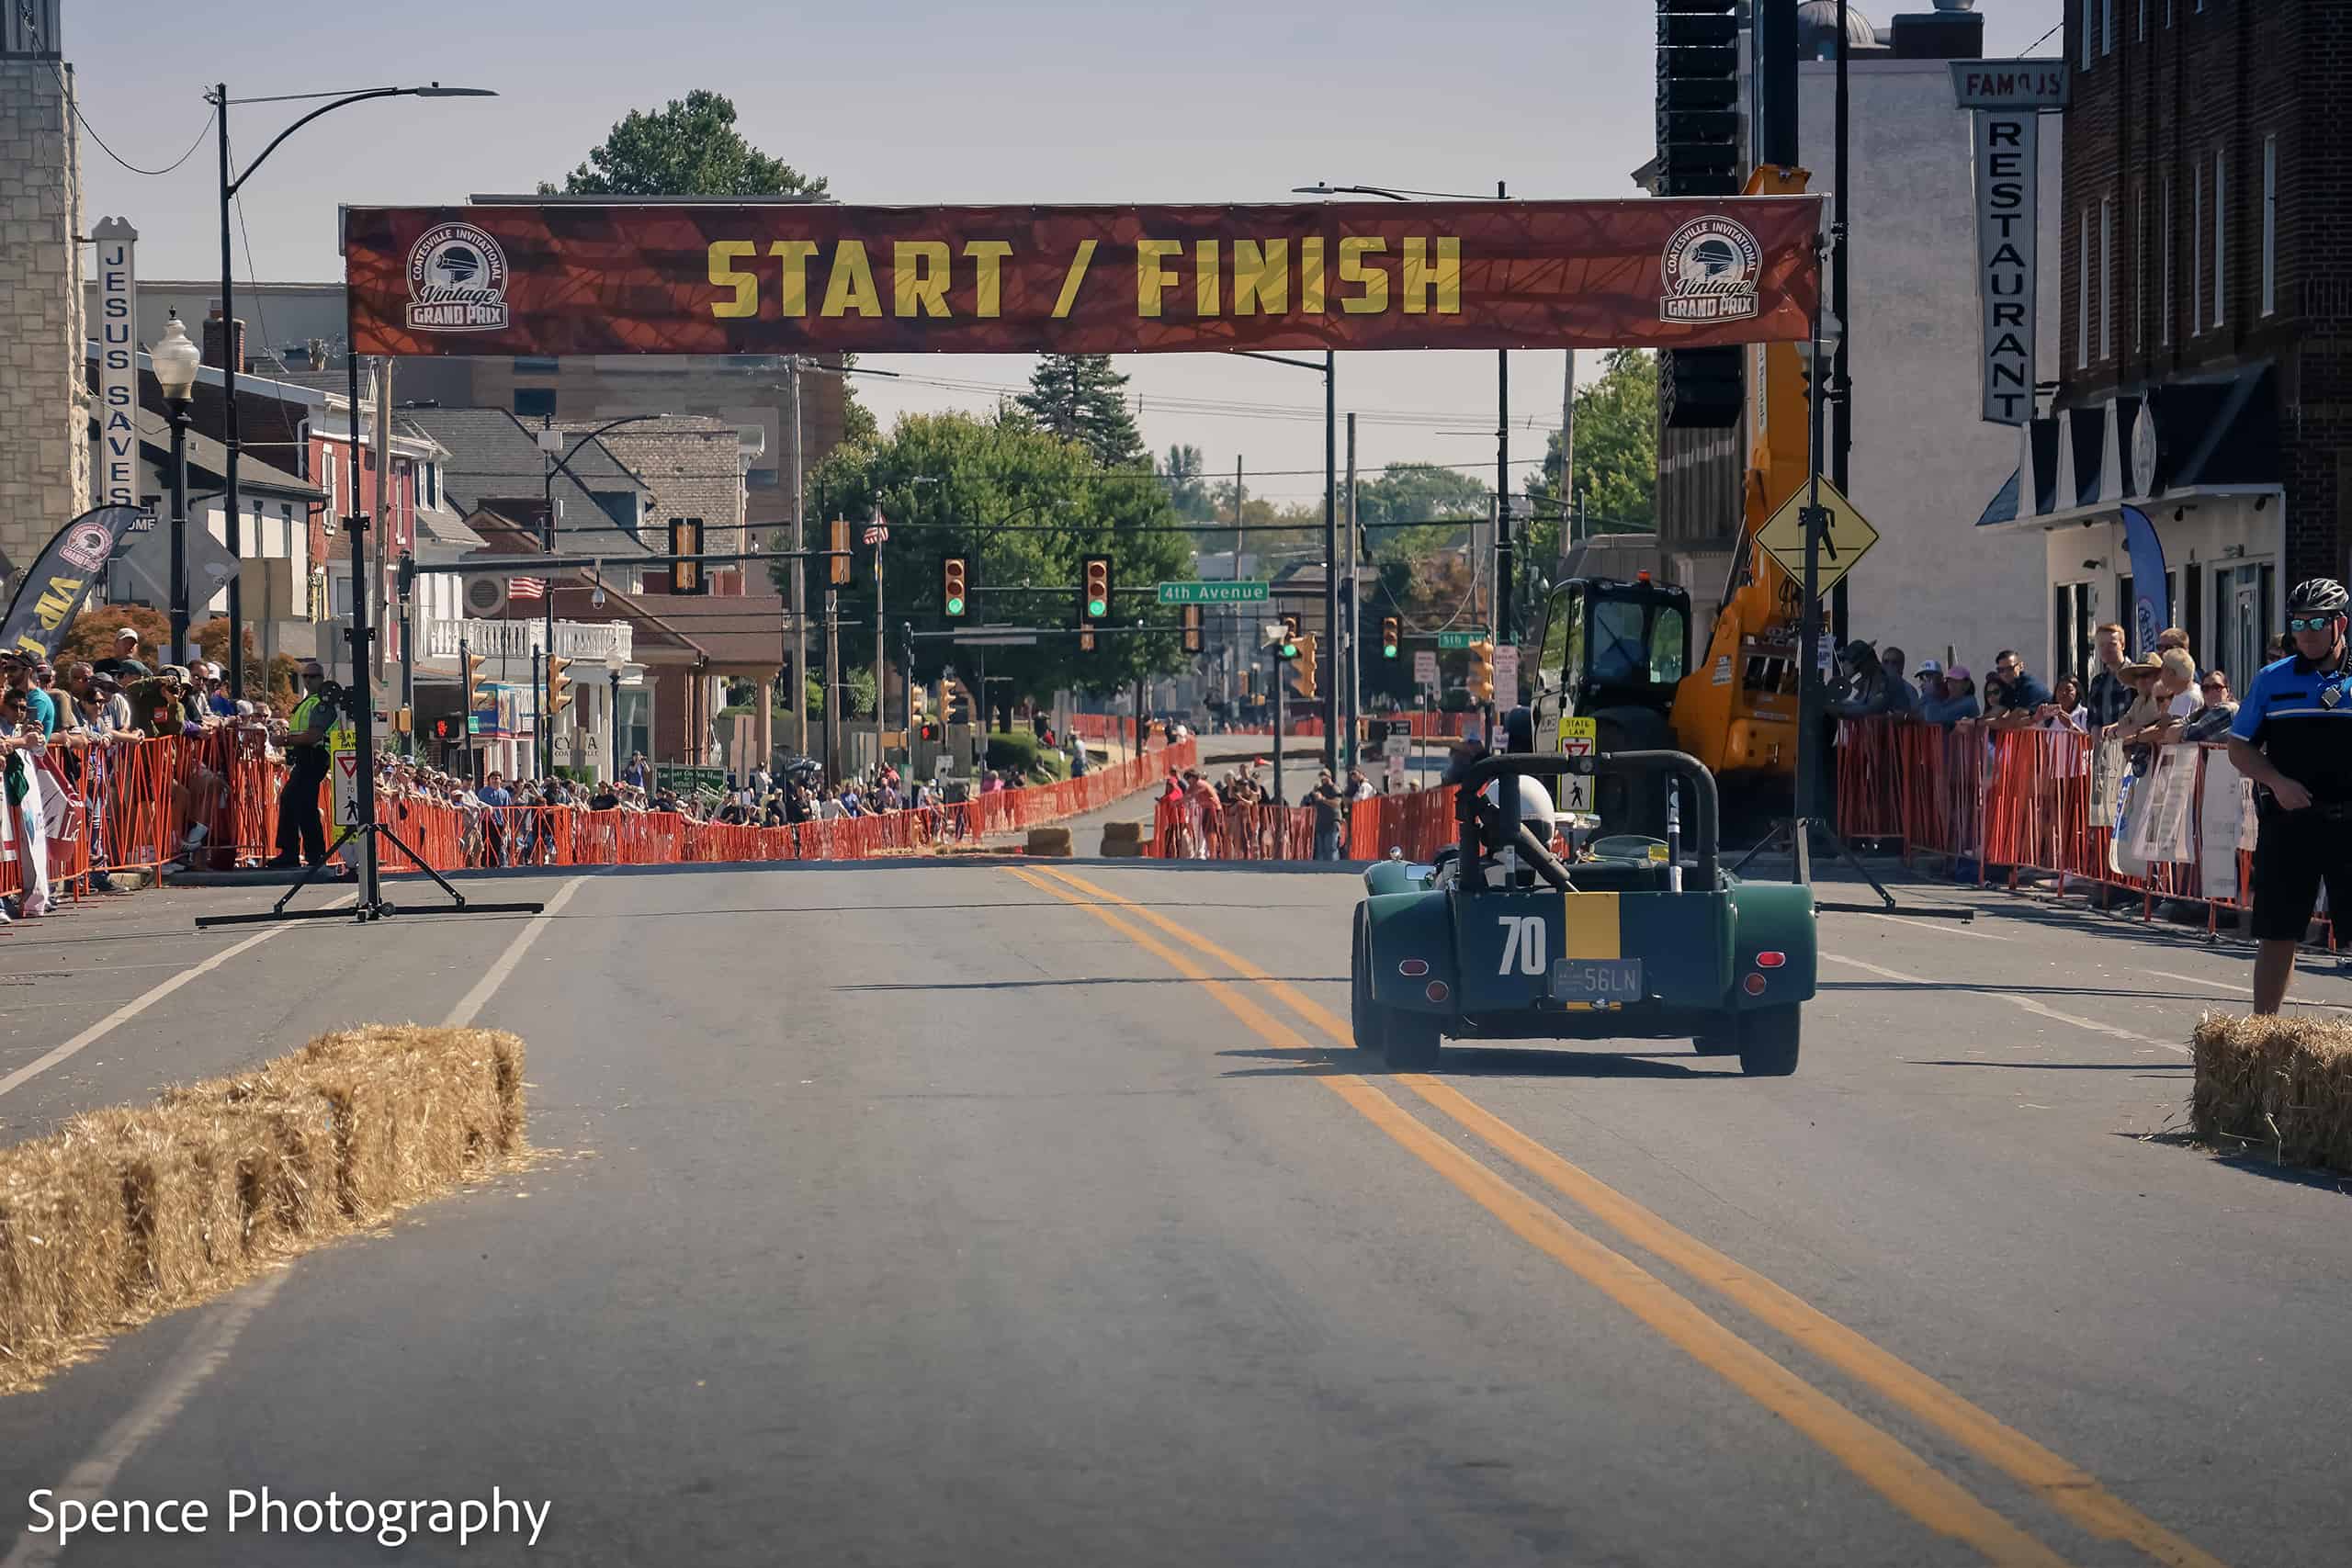 It was held in conjunction with the Coatesville Vintage Invitational Grand Prix, which runs thru the city streets of downtown Coatesville, Pa. 